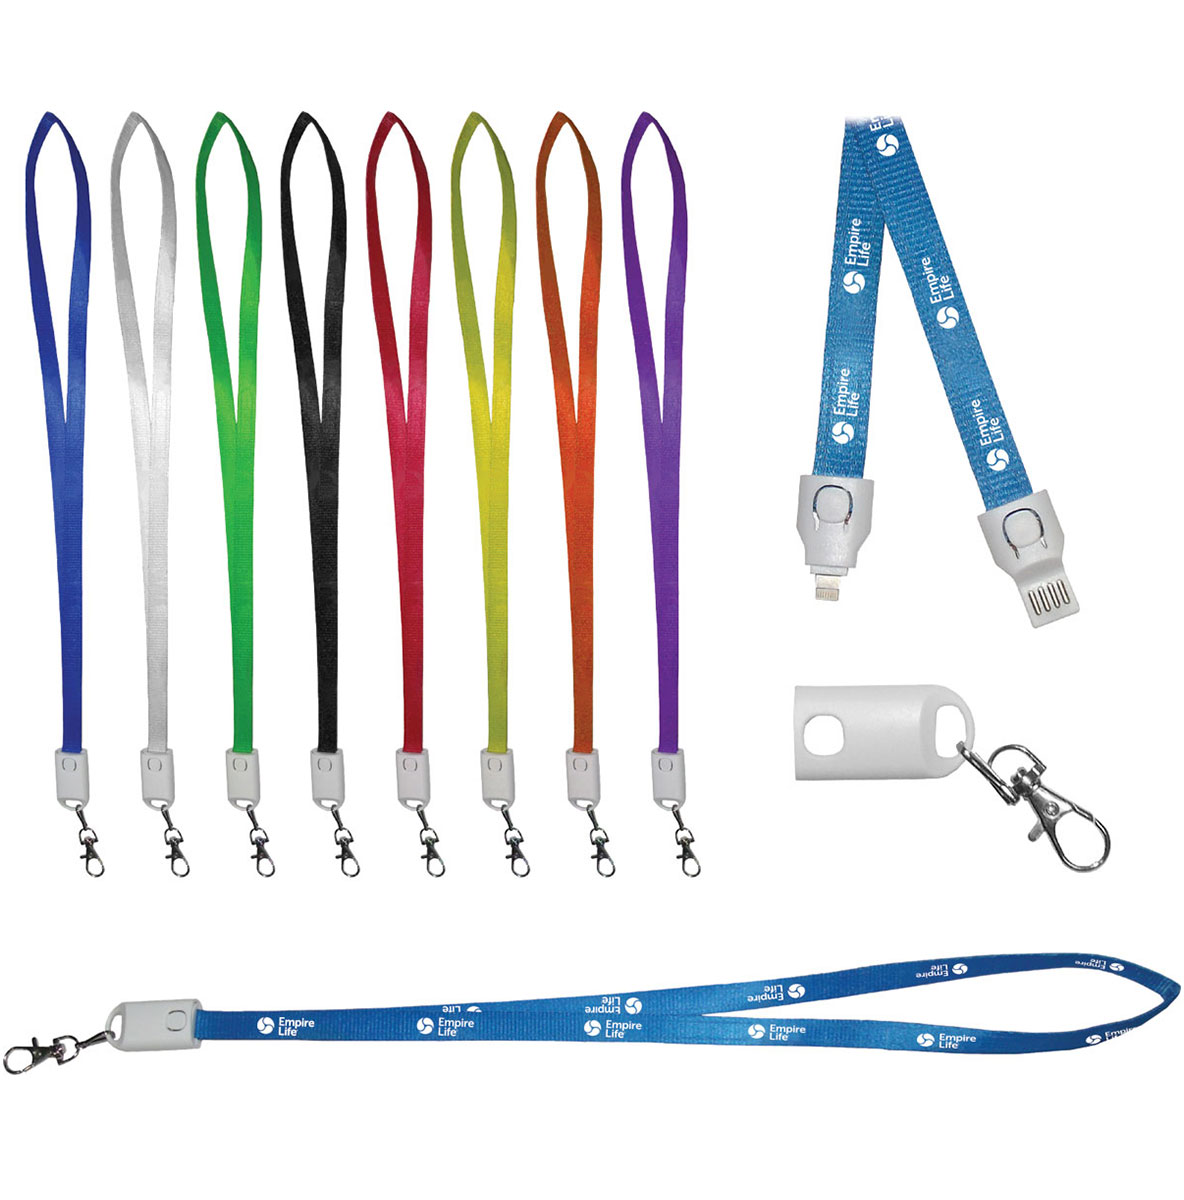 Lanyard 3 in 1 USB Adapter Charging Cable